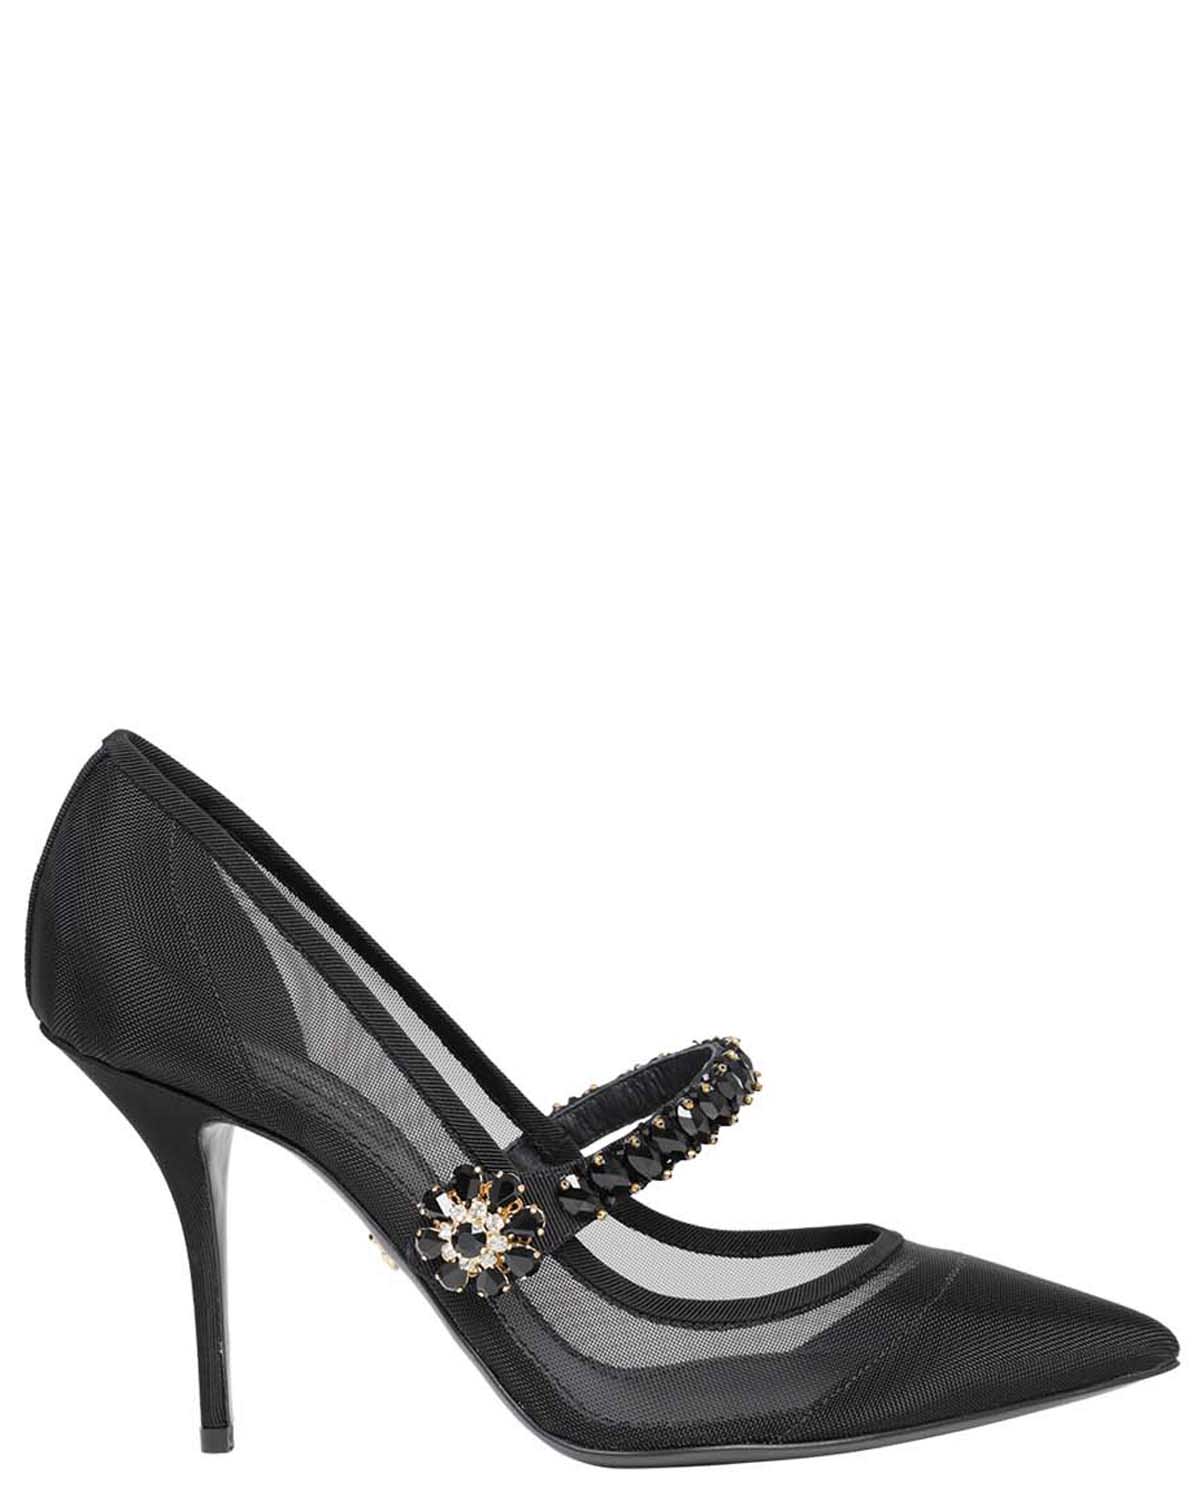 Buy Dolce & Gabbana Black Cardinale Pumps online, shop Dolce & Gabbana shoes with free shipping